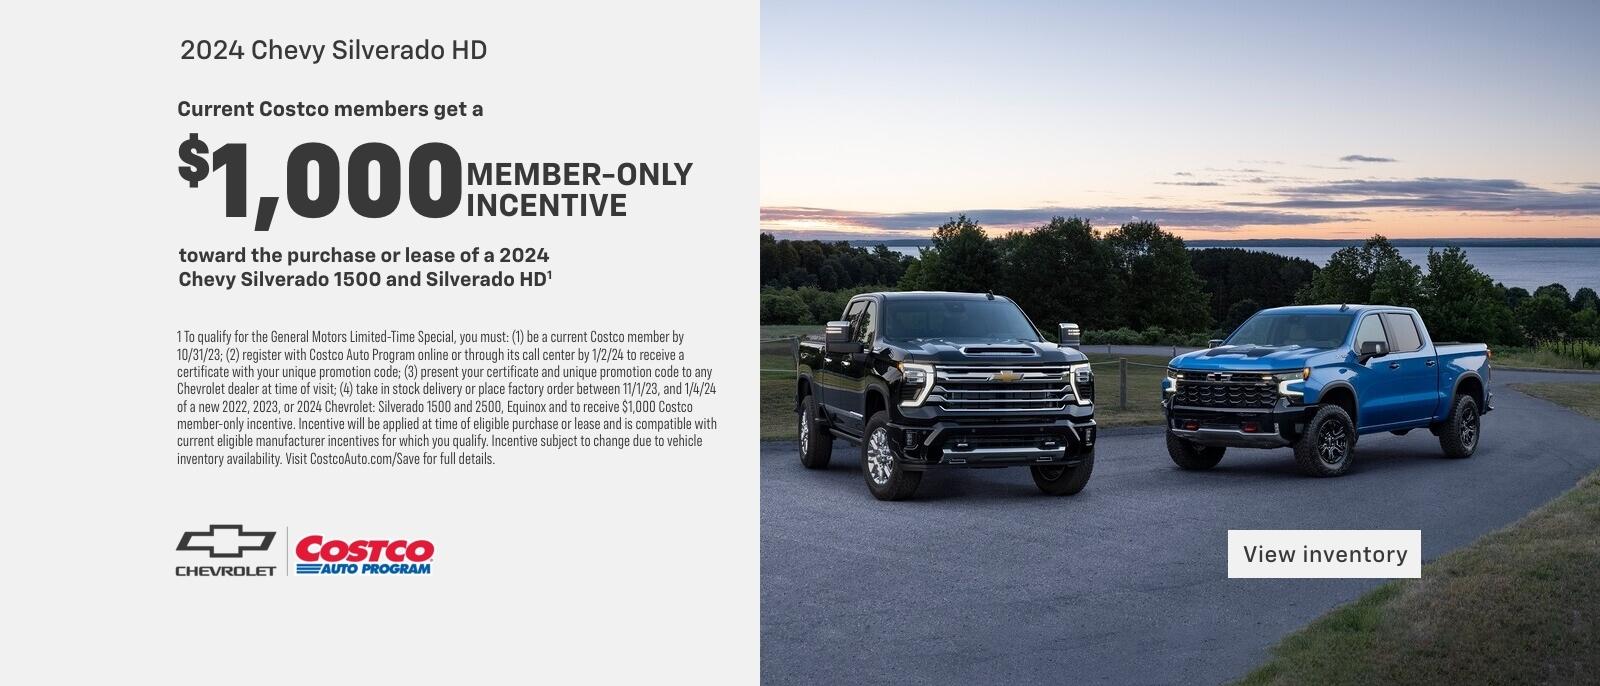 Current Costco members get a $1,000 member-only incentive toward the purchase or lease of a 2024 Chevy Silverado 1500 and Silverado HD. 1 To qualify for the General Motors Limited-Time Special, you must: (1) be a current Costco member by 10/31/23; (2) register with Costco Auto Program online or through its call center by 1/2/24 to receive a certificate with your unique promotion code; (3) present your certificate and unique promotion code to any Chevrolet dealer at time of visit; (4) take in stock delivery or place factory order between 11/1/23, and 1/4/24 of a new 2022, 2023, or 2024 Chevrolet: Silverado 1500 and 2500, Equinox and to receive $1,000 Costco member-only incentive. Incentive will be applied at time of eligible purchase or lease and is compatible with current eligible manufacturer incentives for which you qualify. Incentive subject to change due to vehicle inventory availability. Visit CostcoAuto.com/Save for full details.